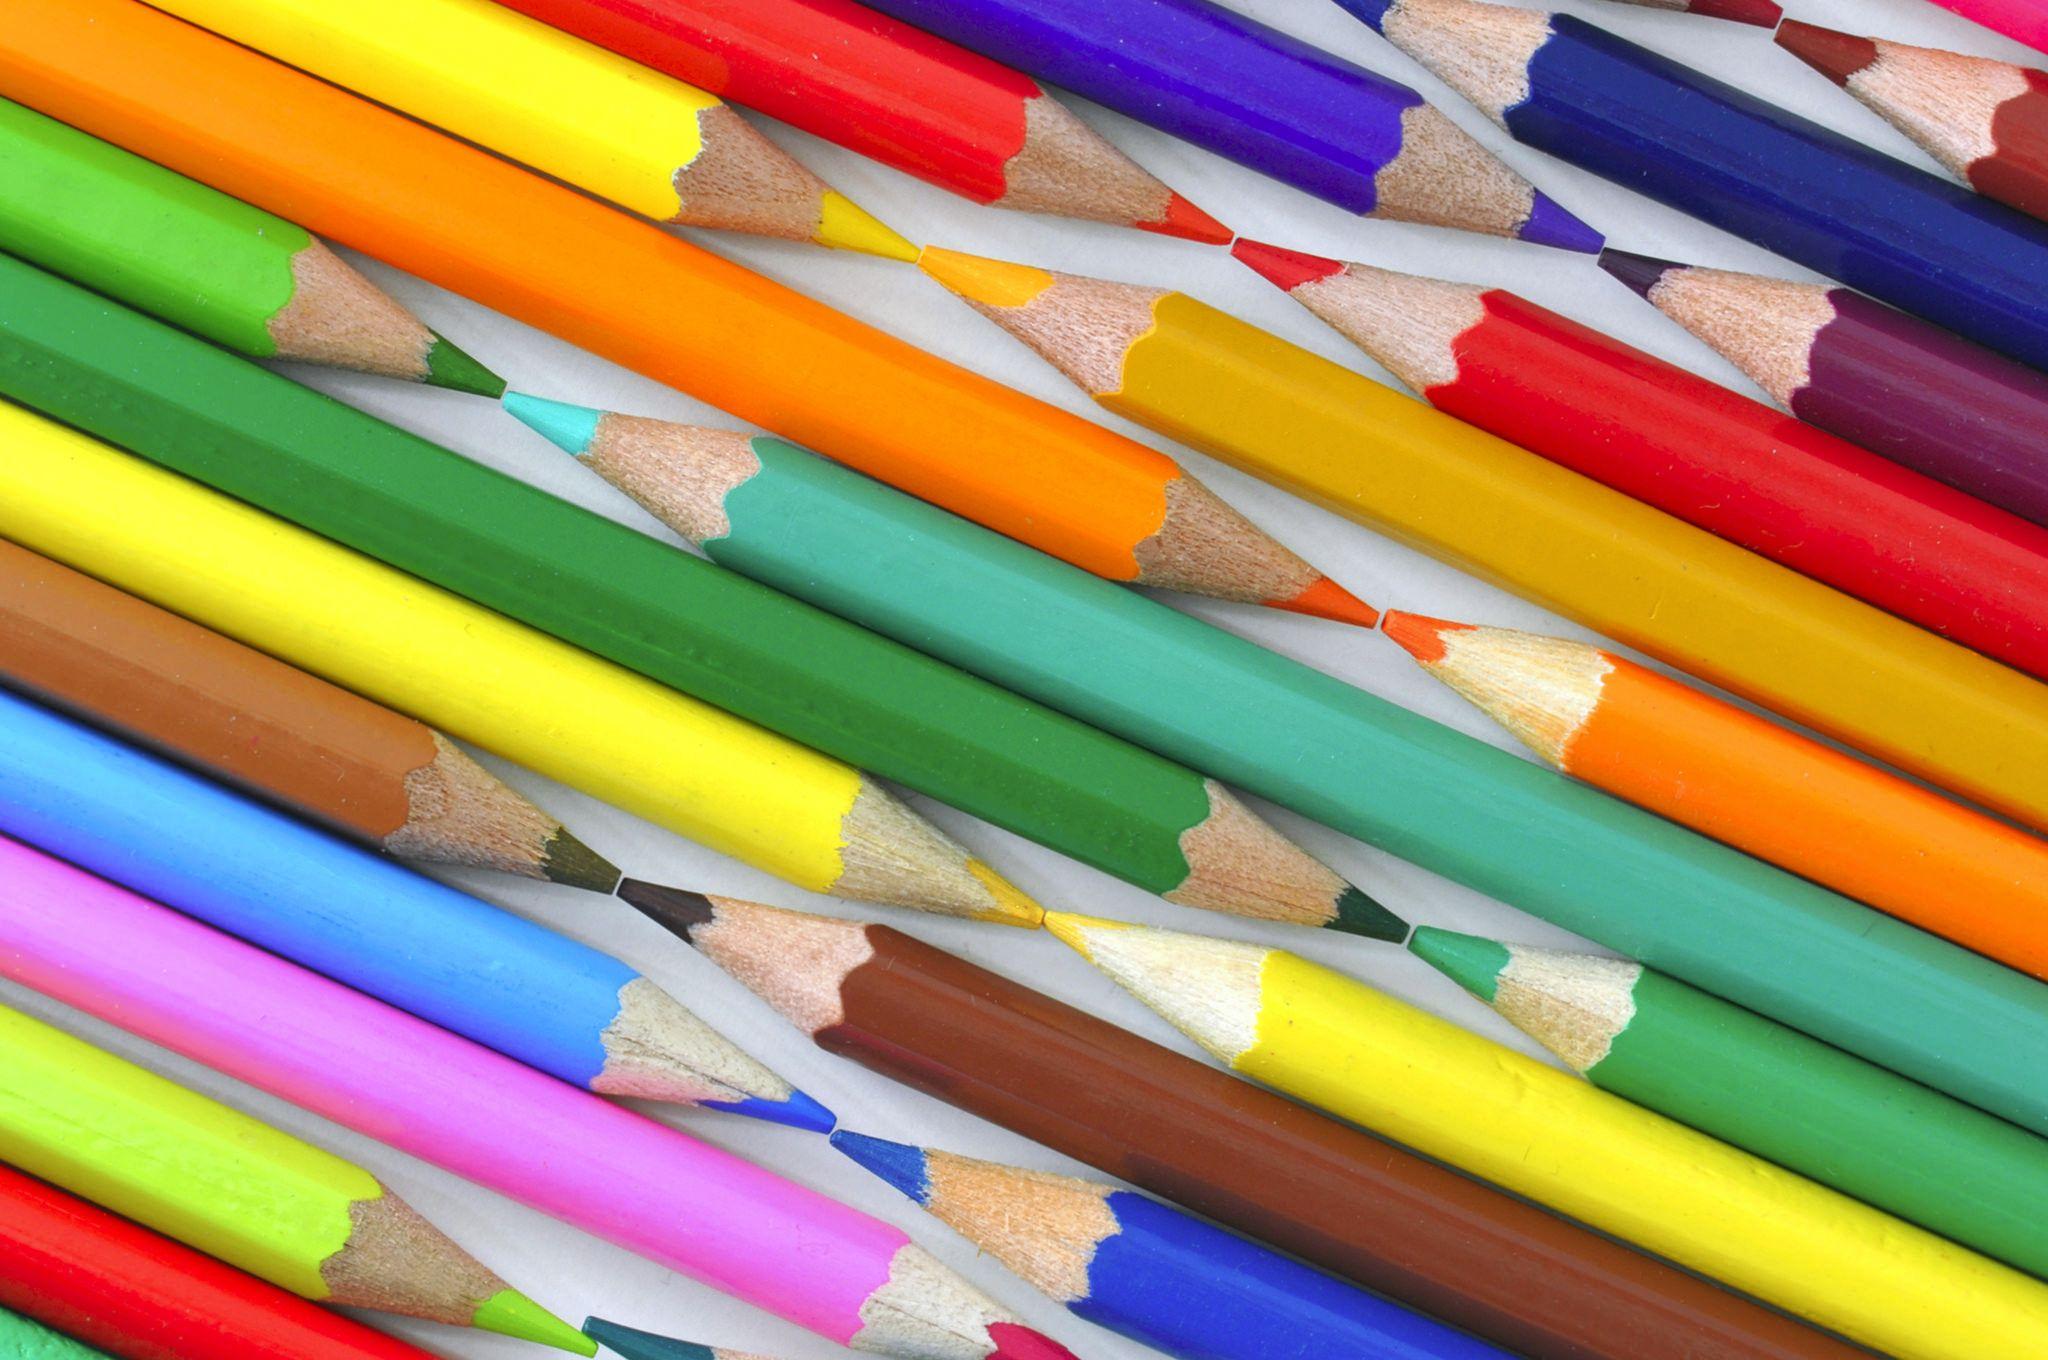 Gallery by tag: crayons wallpaper